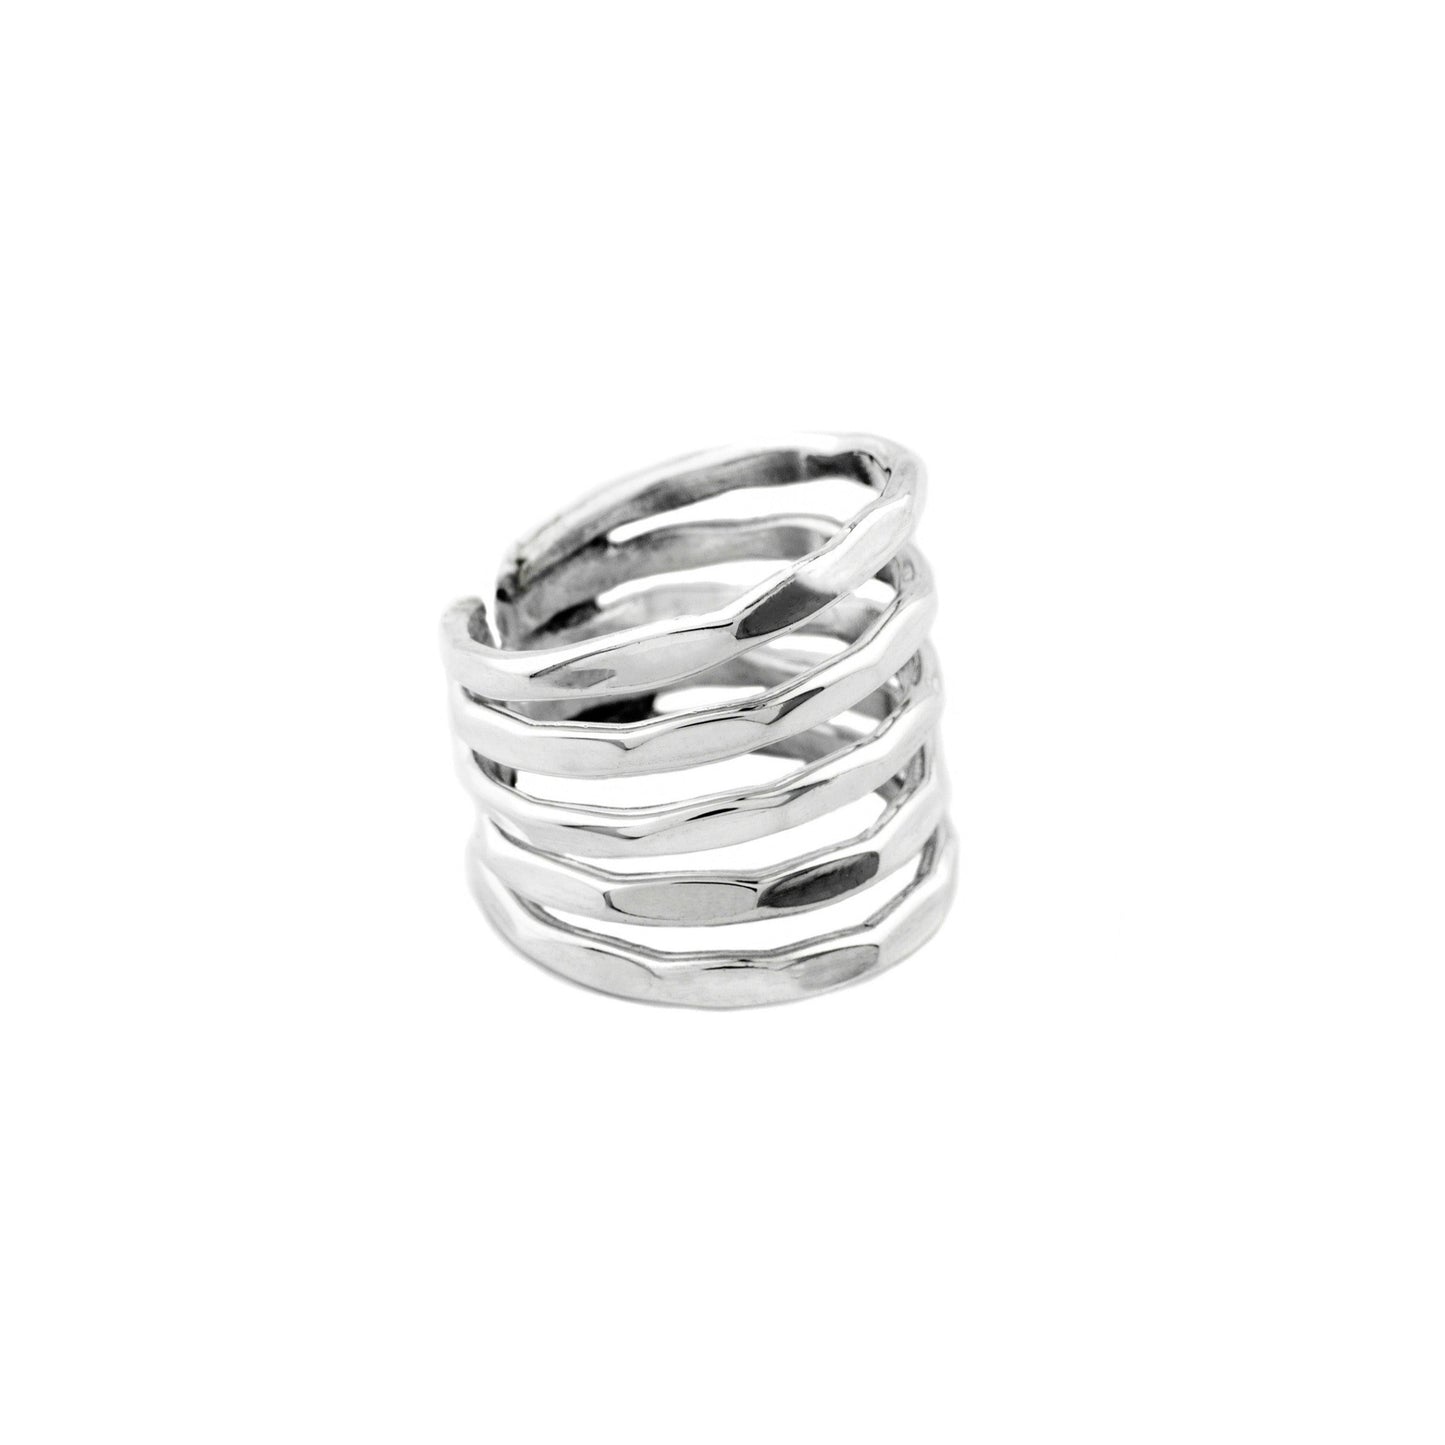 Hammered Multi Layered Sterling Silver Ring